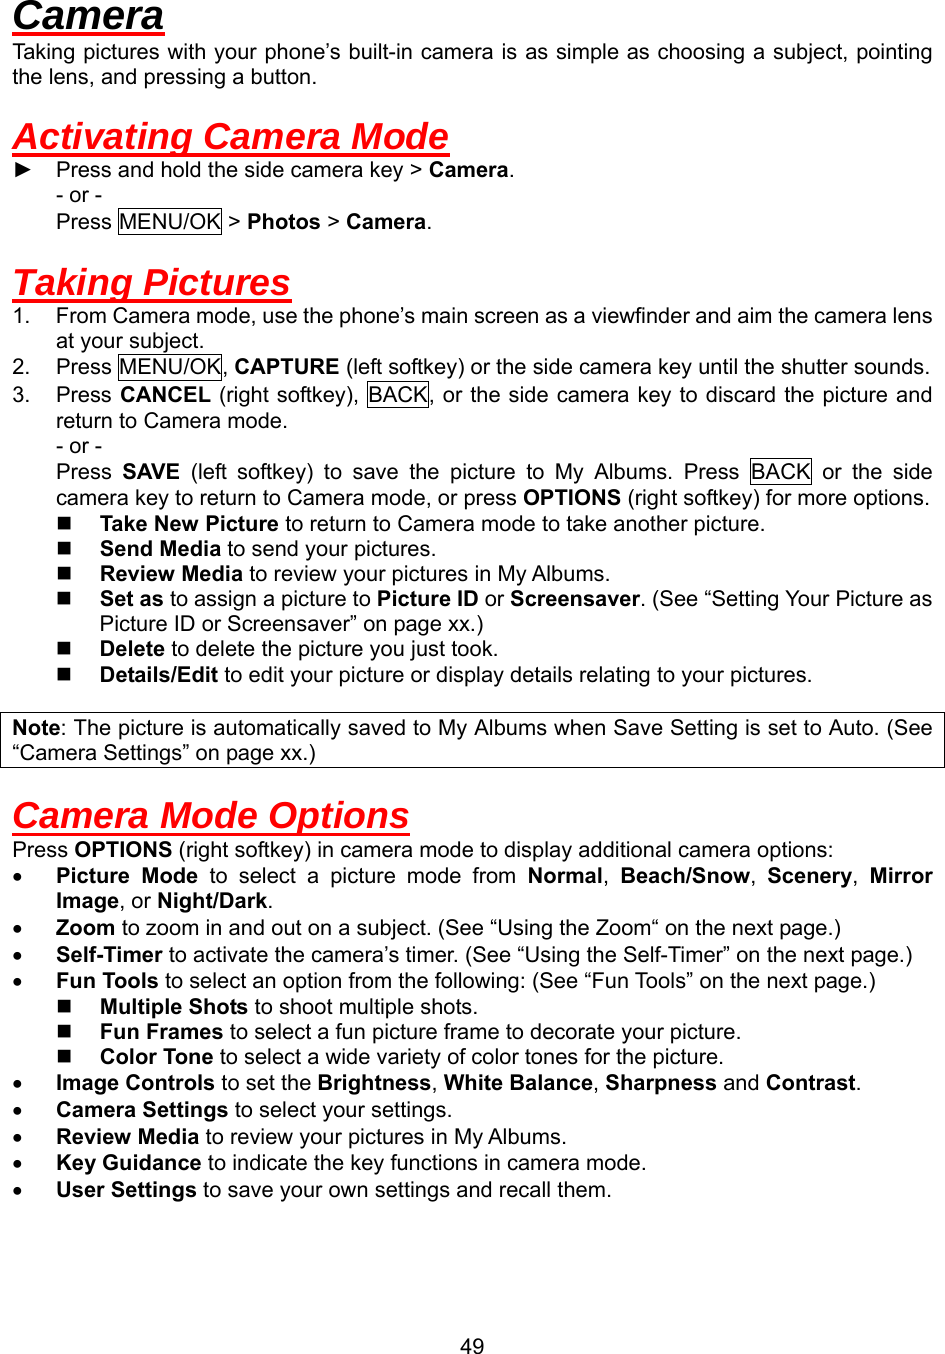  49Camera Taking pictures with your phone’s built-in camera is as simple as choosing a subject, pointing the lens, and pressing a button.  Activating Camera Mode ► Press and hold the side camera key &gt; Camera. - or - Press MENU/OK &gt; Photos &gt; Camera.  Taking Pictures 1.  From Camera mode, use the phone’s main screen as a viewfinder and aim the camera lens at your subject. 2. Press MENU/OK, CAPTURE (left softkey) or the side camera key until the shutter sounds. 3. Press CANCEL (right softkey), BACK, or the side camera key to discard the picture and return to Camera mode. - or - Press  SAVE (left softkey) to save the picture to My Albums. Press BACK or the side camera key to return to Camera mode, or press OPTIONS (right softkey) for more options.   Take New Picture to return to Camera mode to take another picture.   Send Media to send your pictures.   Review Media to review your pictures in My Albums.   Set as to assign a picture to Picture ID or Screensaver. (See “Setting Your Picture as Picture ID or Screensaver” on page xx.)   Delete to delete the picture you just took.   Details/Edit to edit your picture or display details relating to your pictures.  Note: The picture is automatically saved to My Albums when Save Setting is set to Auto. (See “Camera Settings” on page xx.)  Camera Mode Options Press OPTIONS (right softkey) in camera mode to display additional camera options: •  Picture Mode to select a picture mode from Normal,  Beach/Snow,  Scenery,  Mirror Image, or Night/Dark. •  Zoom to zoom in and out on a subject. (See “Using the Zoom“ on the next page.) •  Self-Timer to activate the camera’s timer. (See “Using the Self-Timer” on the next page.) •  Fun Tools to select an option from the following: (See “Fun Tools” on the next page.)   Multiple Shots to shoot multiple shots.   Fun Frames to select a fun picture frame to decorate your picture.   Color Tone to select a wide variety of color tones for the picture. •  Image Controls to set the Brightness, White Balance, Sharpness and Contrast. •  Camera Settings to select your settings.   •  Review Media to review your pictures in My Albums. •  Key Guidance to indicate the key functions in camera mode. •  User Settings to save your own settings and recall them.  